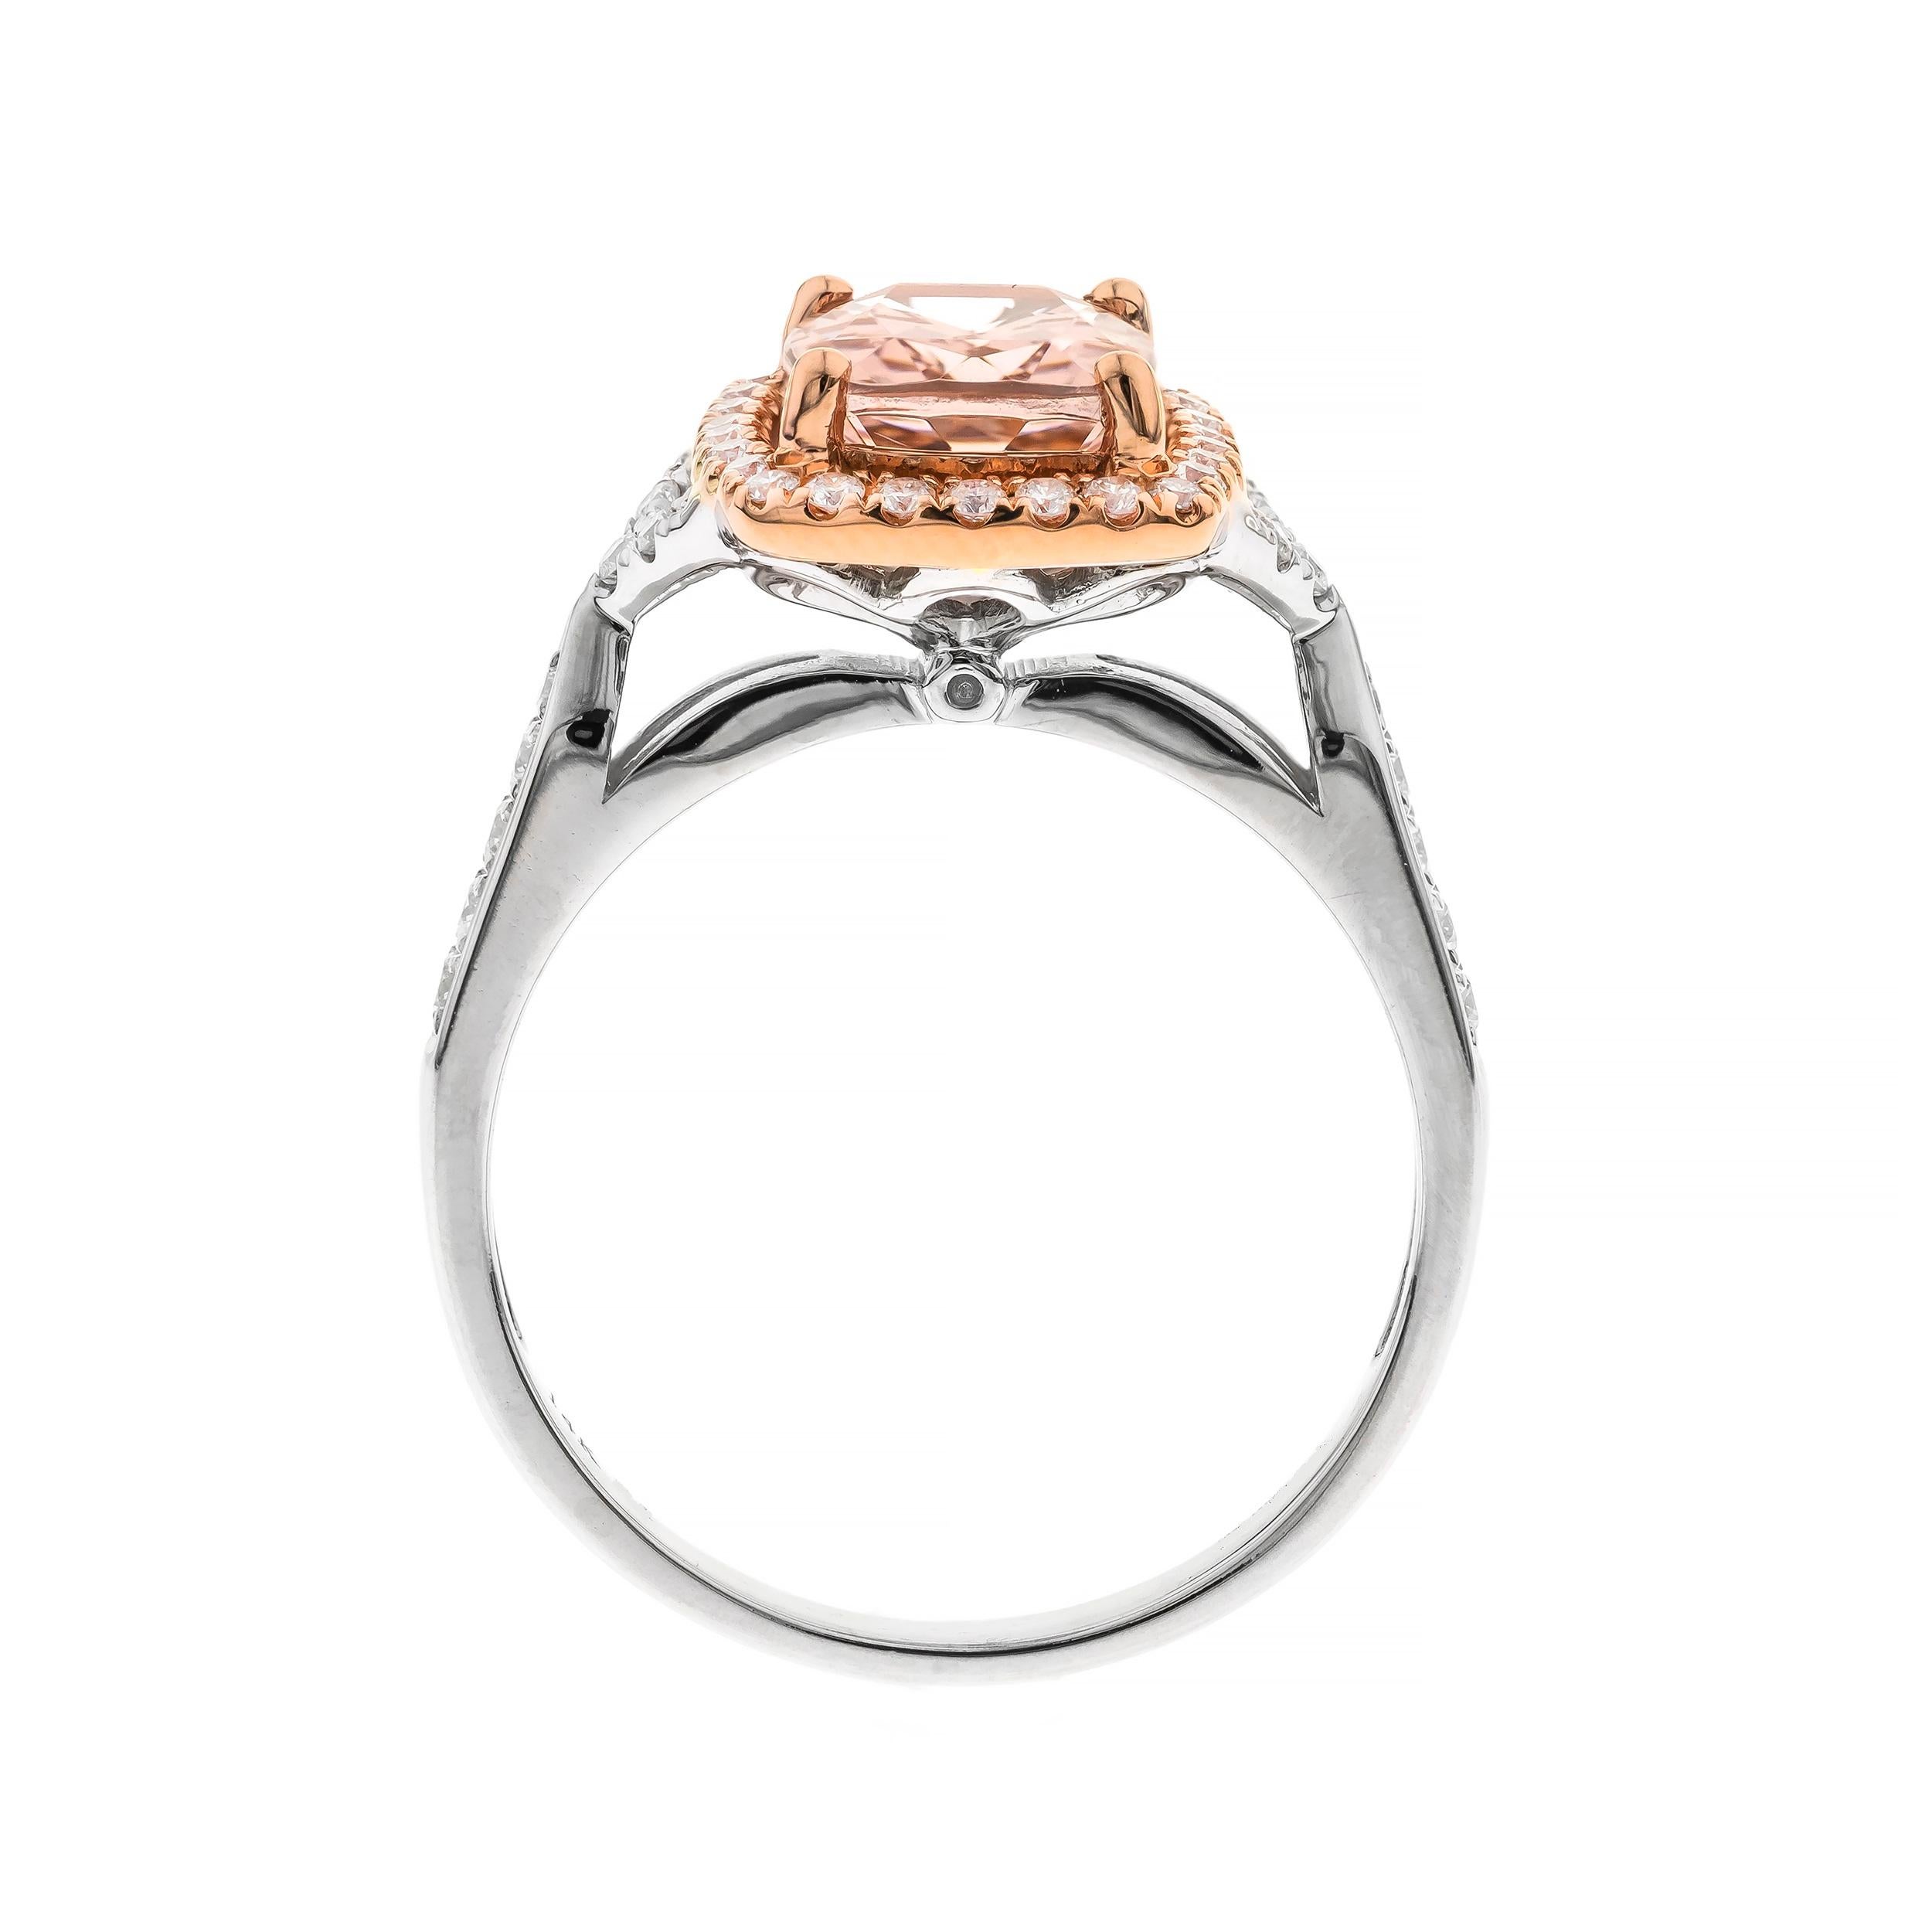 Decorate yourself in elegance with this Ring is crafted from 14-karat White Gold by Gin & Grace. This Ring is made up of 9x7 mm Cushion-Cut (1 pcs) 1.91 carat Morganite and Round-cut White Diamond (42 Pcs) 0.32 Carat. This Ring is weight 4.02 grams.